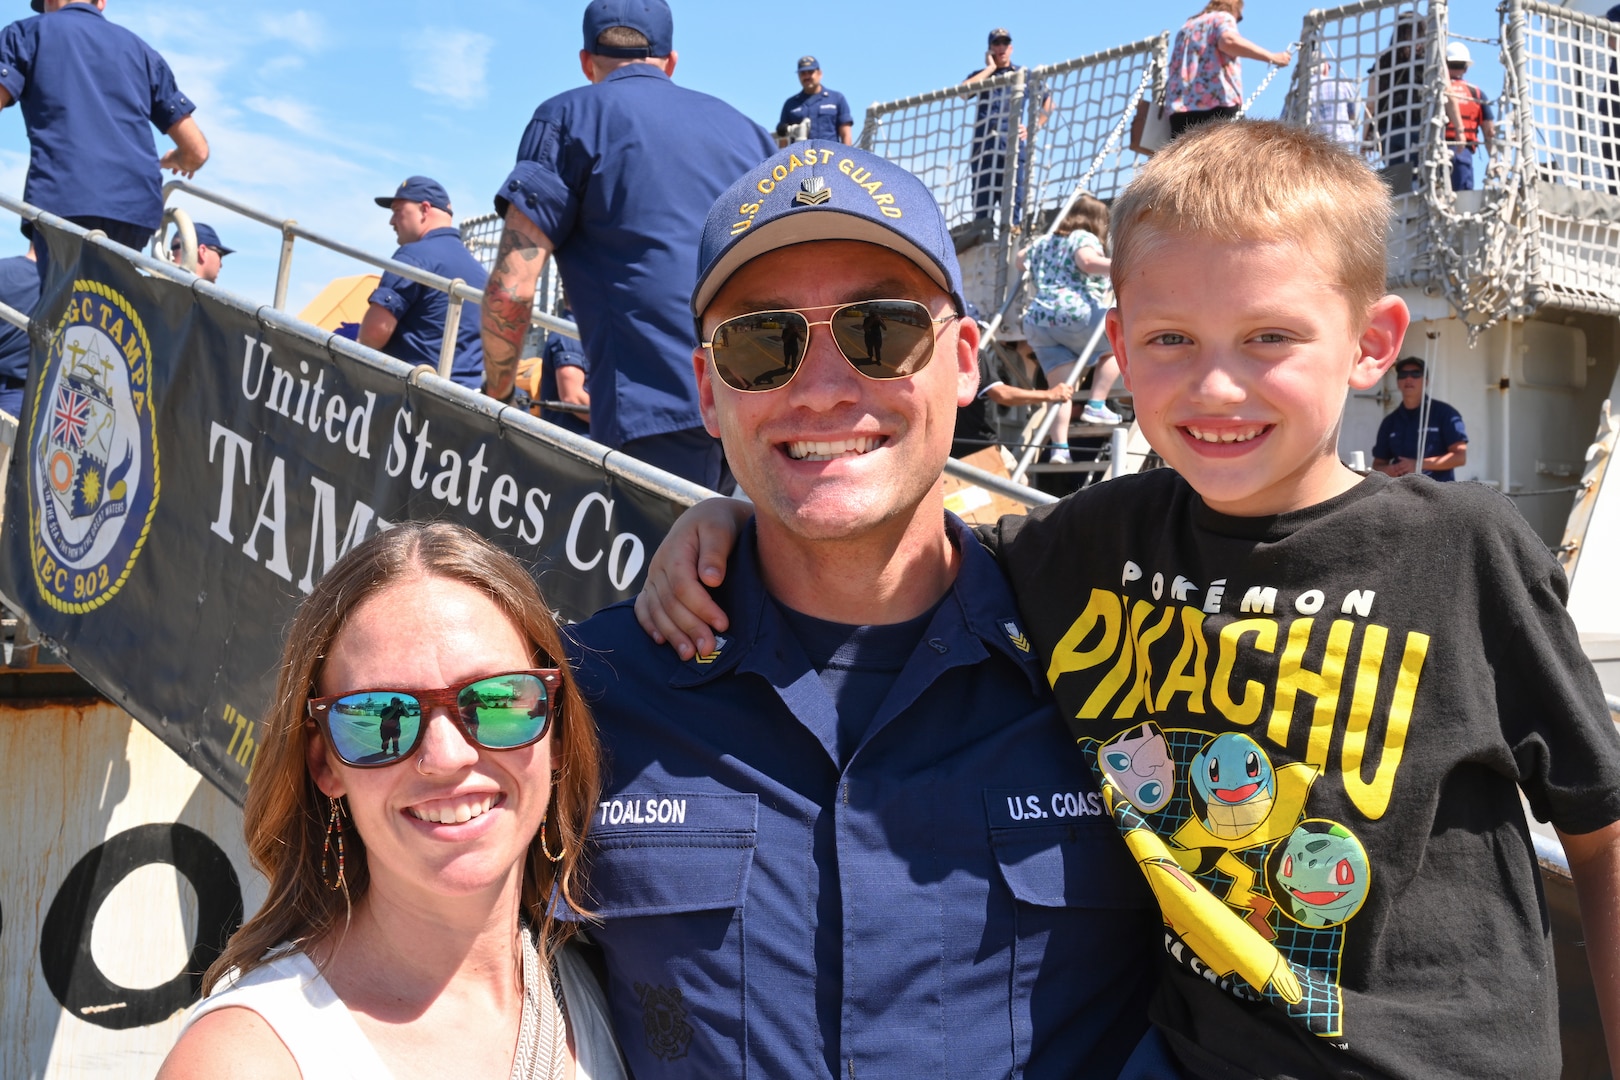 Petty Officer 1st Class Christopher Toalson, a machinery technician assigned to U.S. Coast Guard Cutter Tampa (WMEC 902), poses for a photograph with his wife and son, Sept. 5, 2023, in Portsmouth, Virginia following the completion of Tampa's 67-day patrol in the Florida Straits and Windward Passage. Tampa deployed in support of Homeland Security Task Force — Southeast and conducted maritime safety and security missions. (U.S. Coast Guard photo by Petty Officer 2nd Class Brandon Hillard)